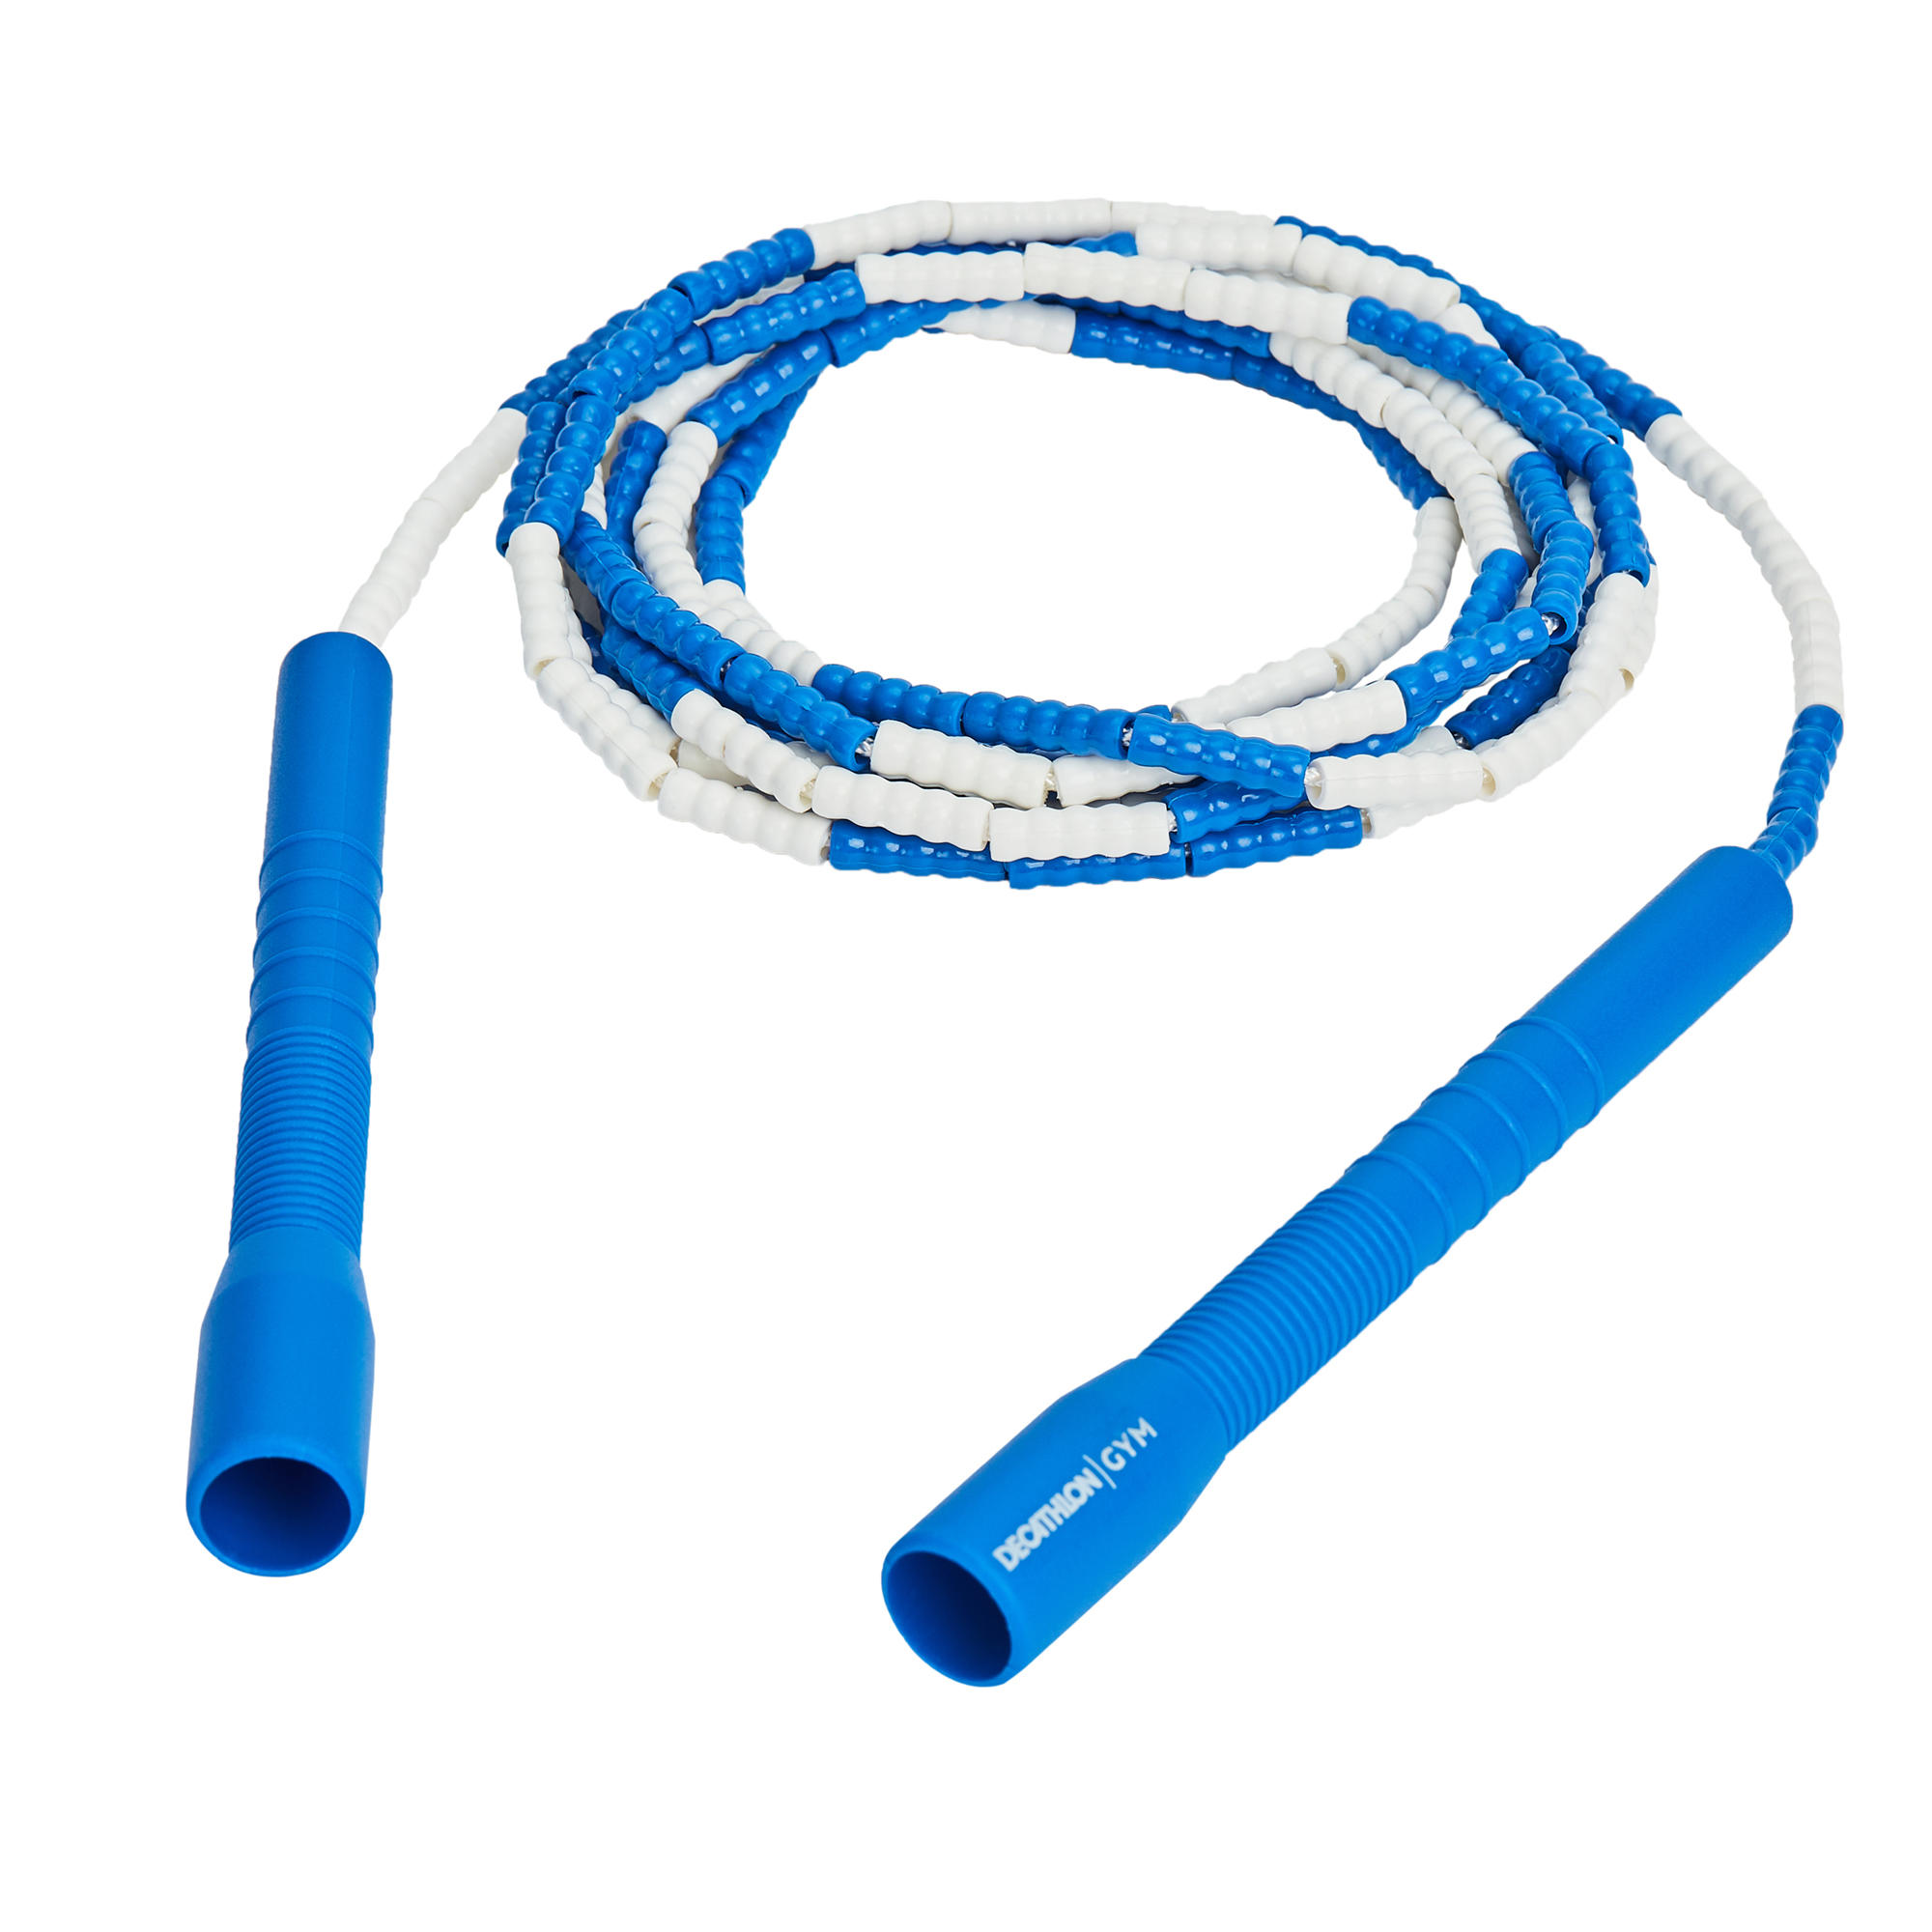 Gymnastics Accessories A skipping rope 